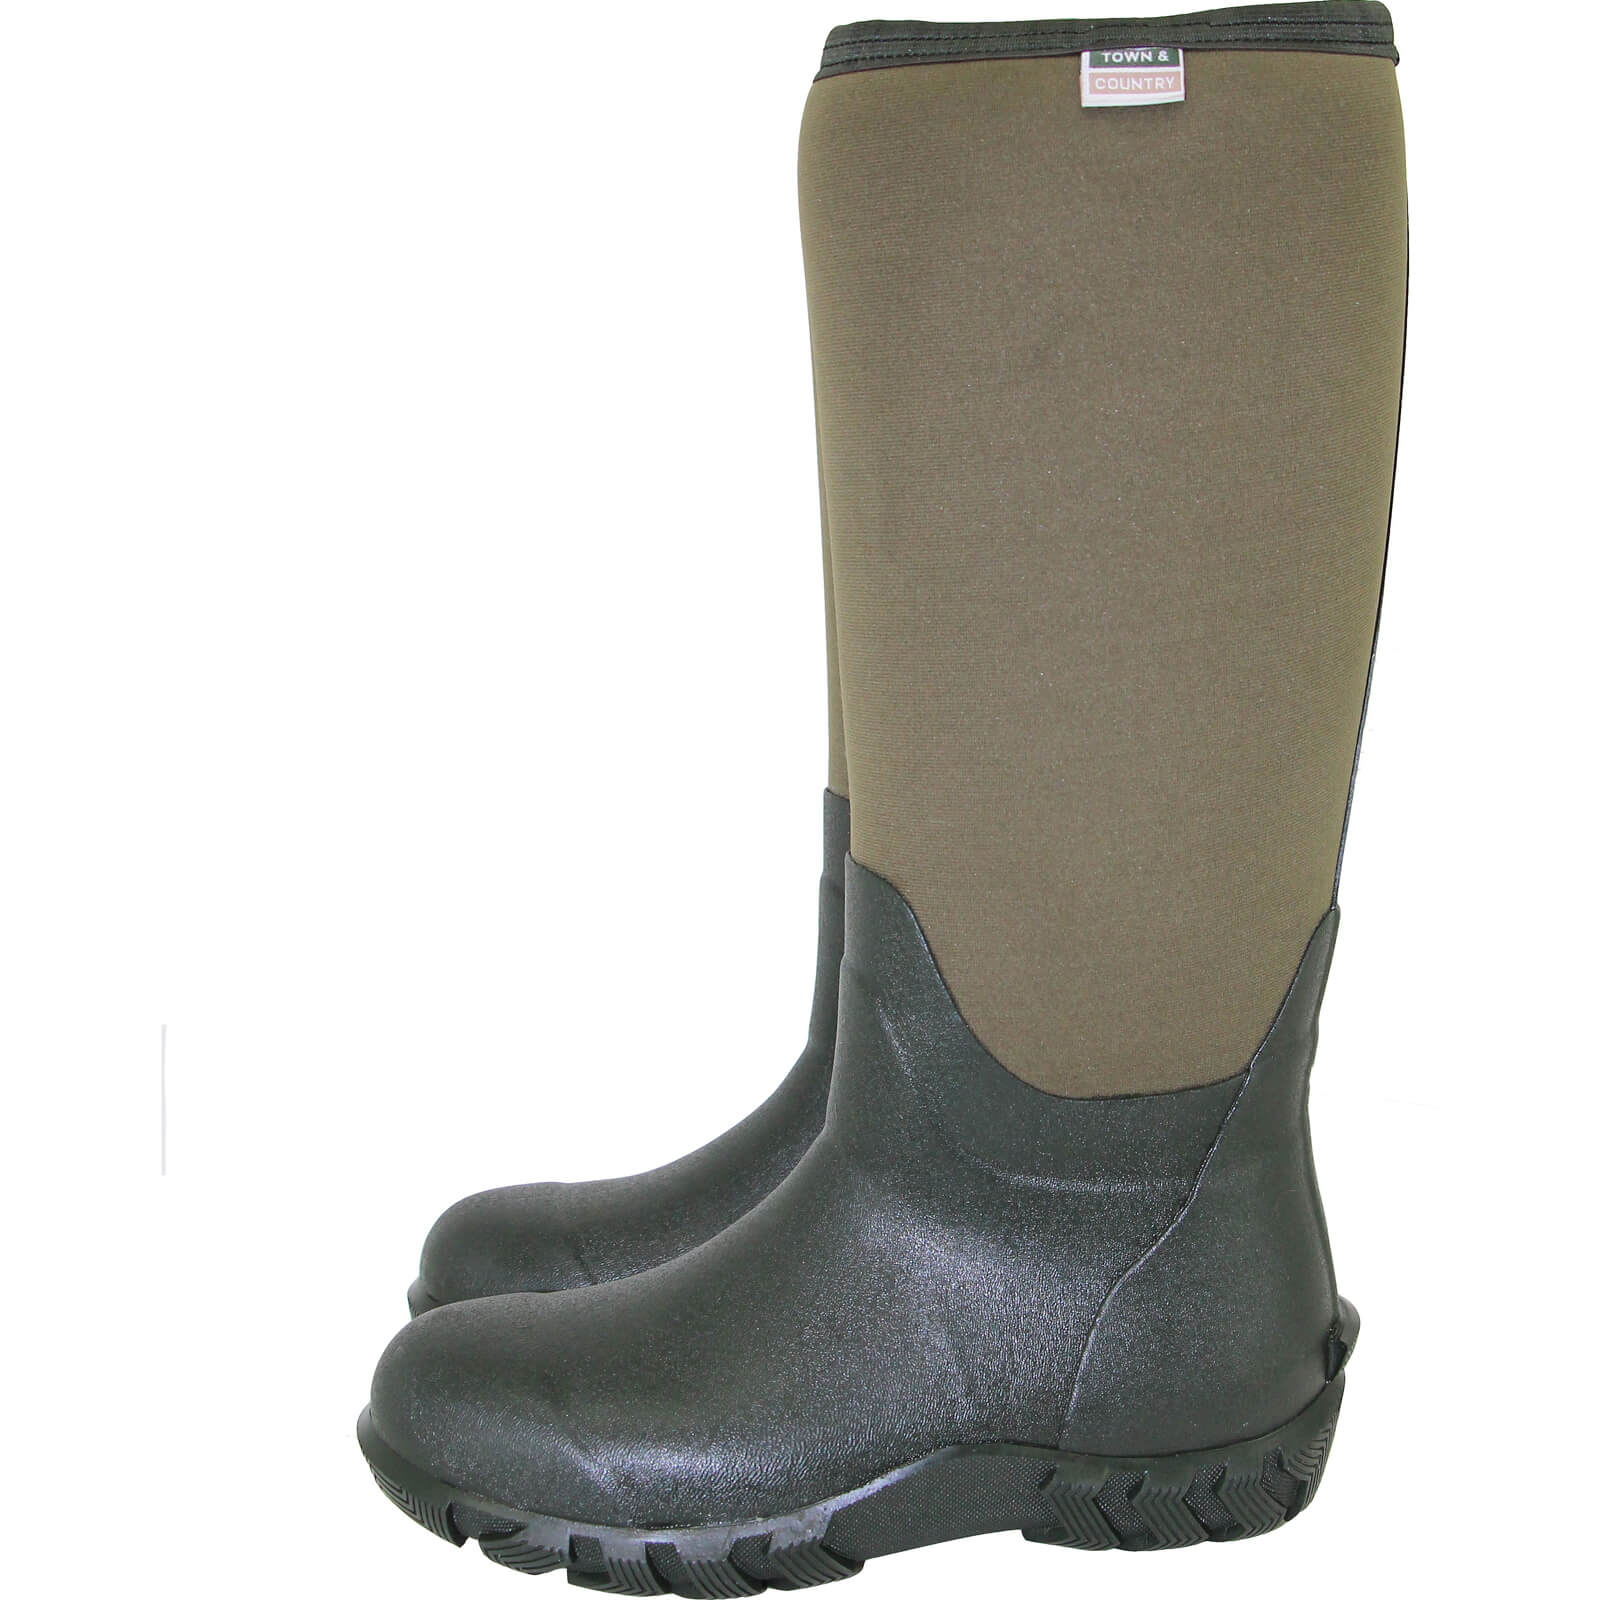 Image of Town and Country Buckingham Rubber Wellington Boots Green Size 5